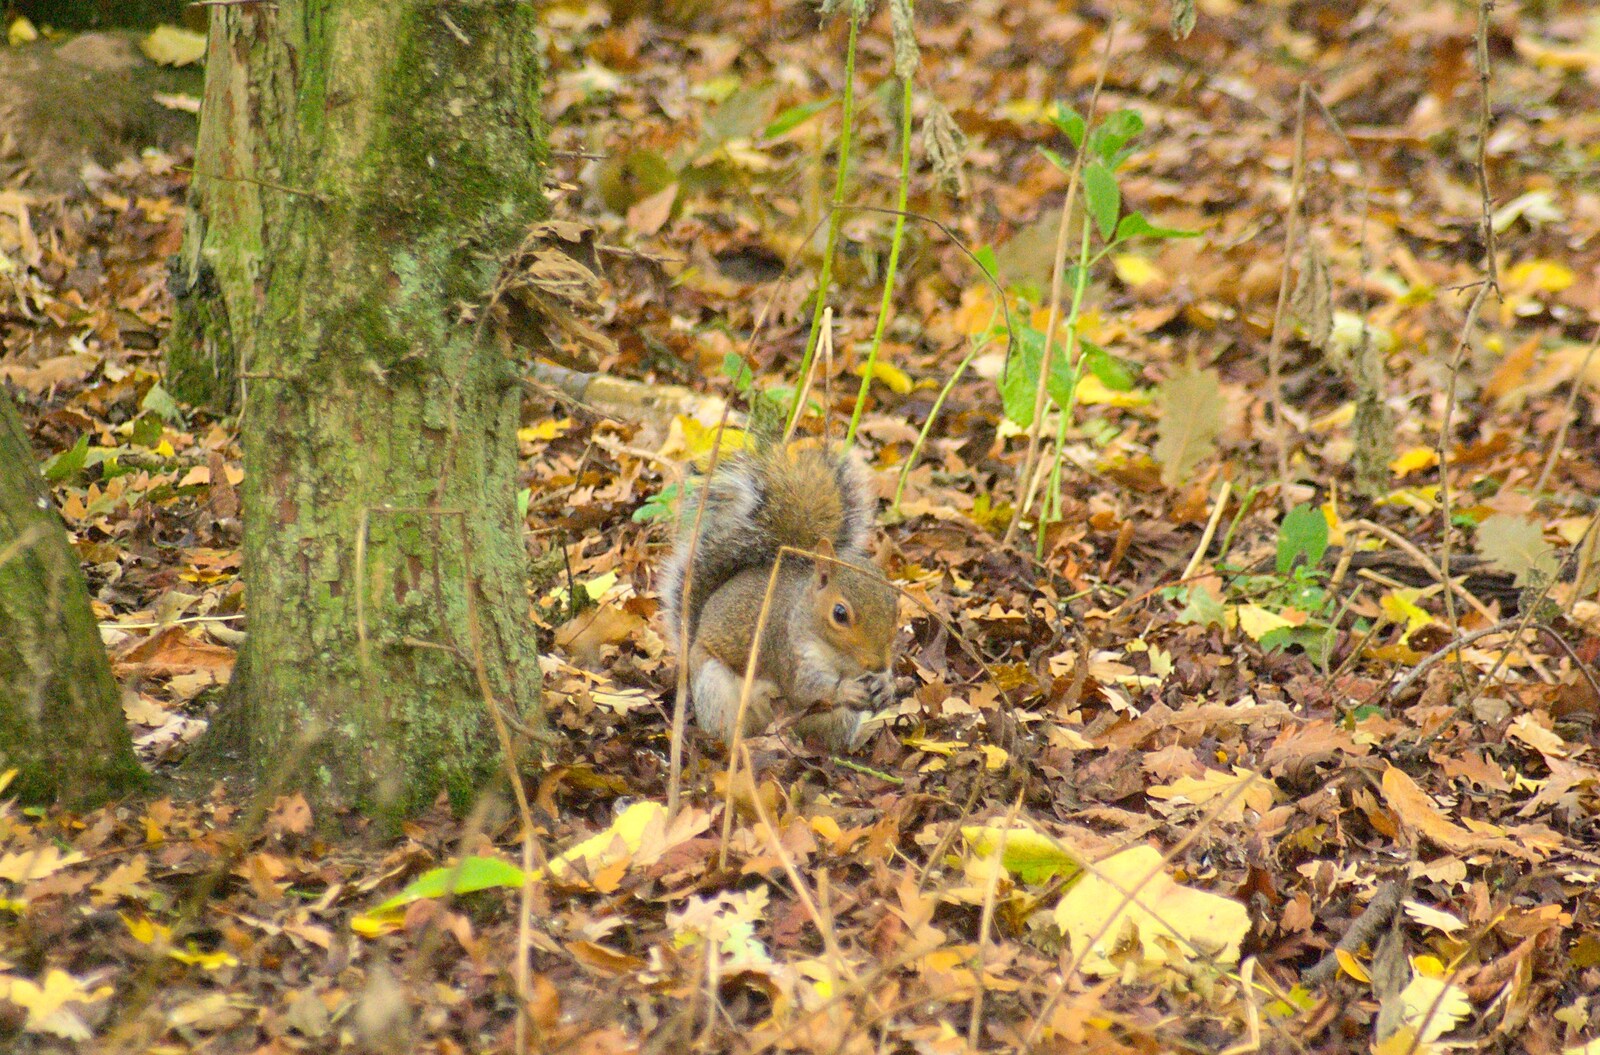 A squirrel pauses with a nut from The NCT Sale and a Walk in the Woods, Bressingham and Thornham, Norfolk and Suffolk - 27th November 2011